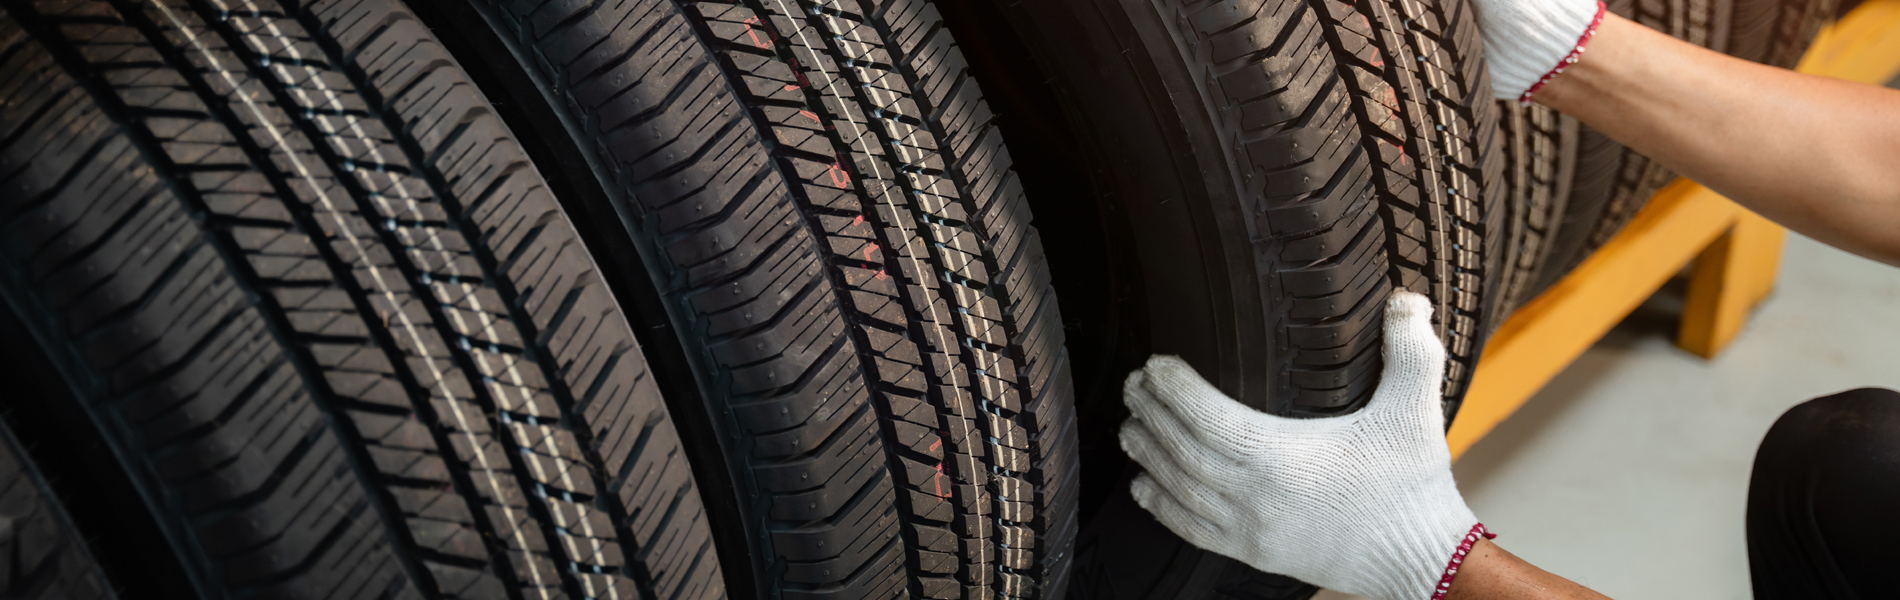 banner_radial_tyres